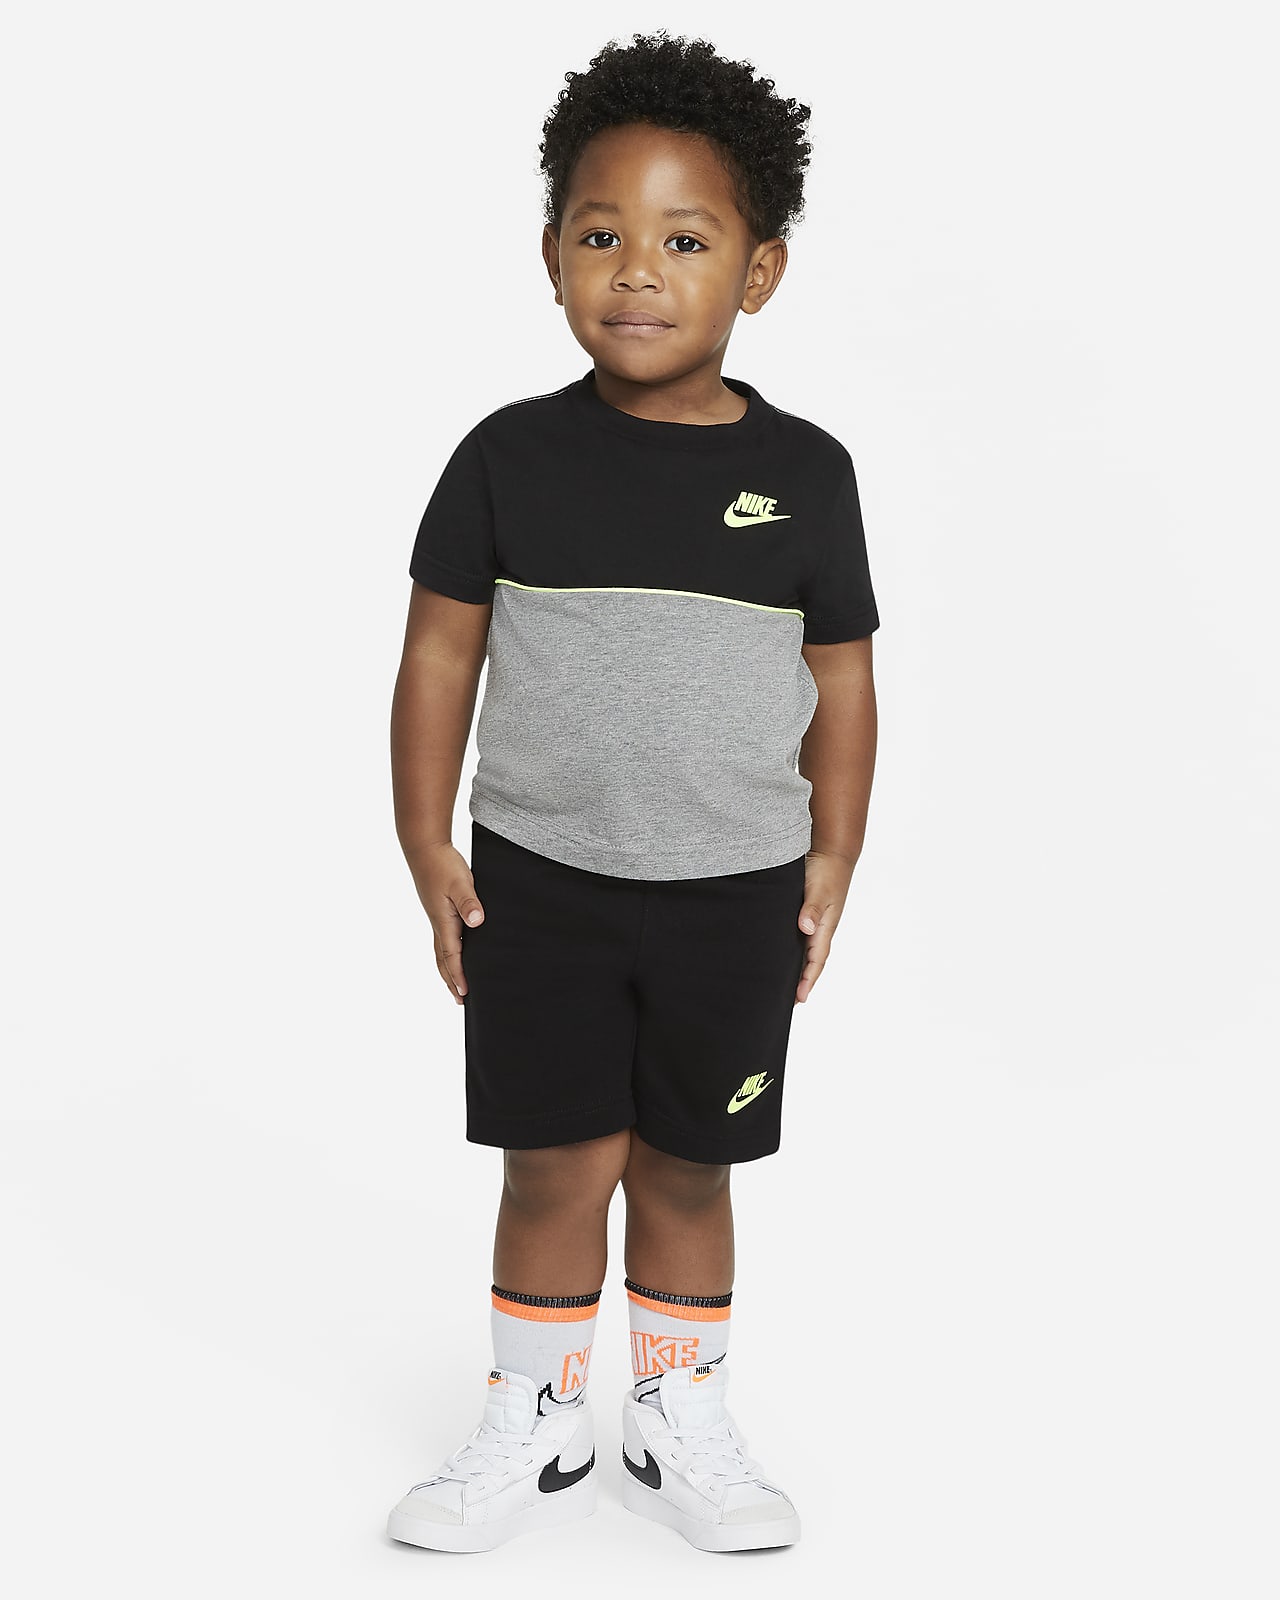 https://static.nike.com/a/images/t_PDP_1280_v1/f_auto,q_auto:eco/dda6d5fe-7ff2-4940-8578-1975cfa1a3d9/toddler-t-shirt-and-french-terry-shorts-set-1QJxPR.png